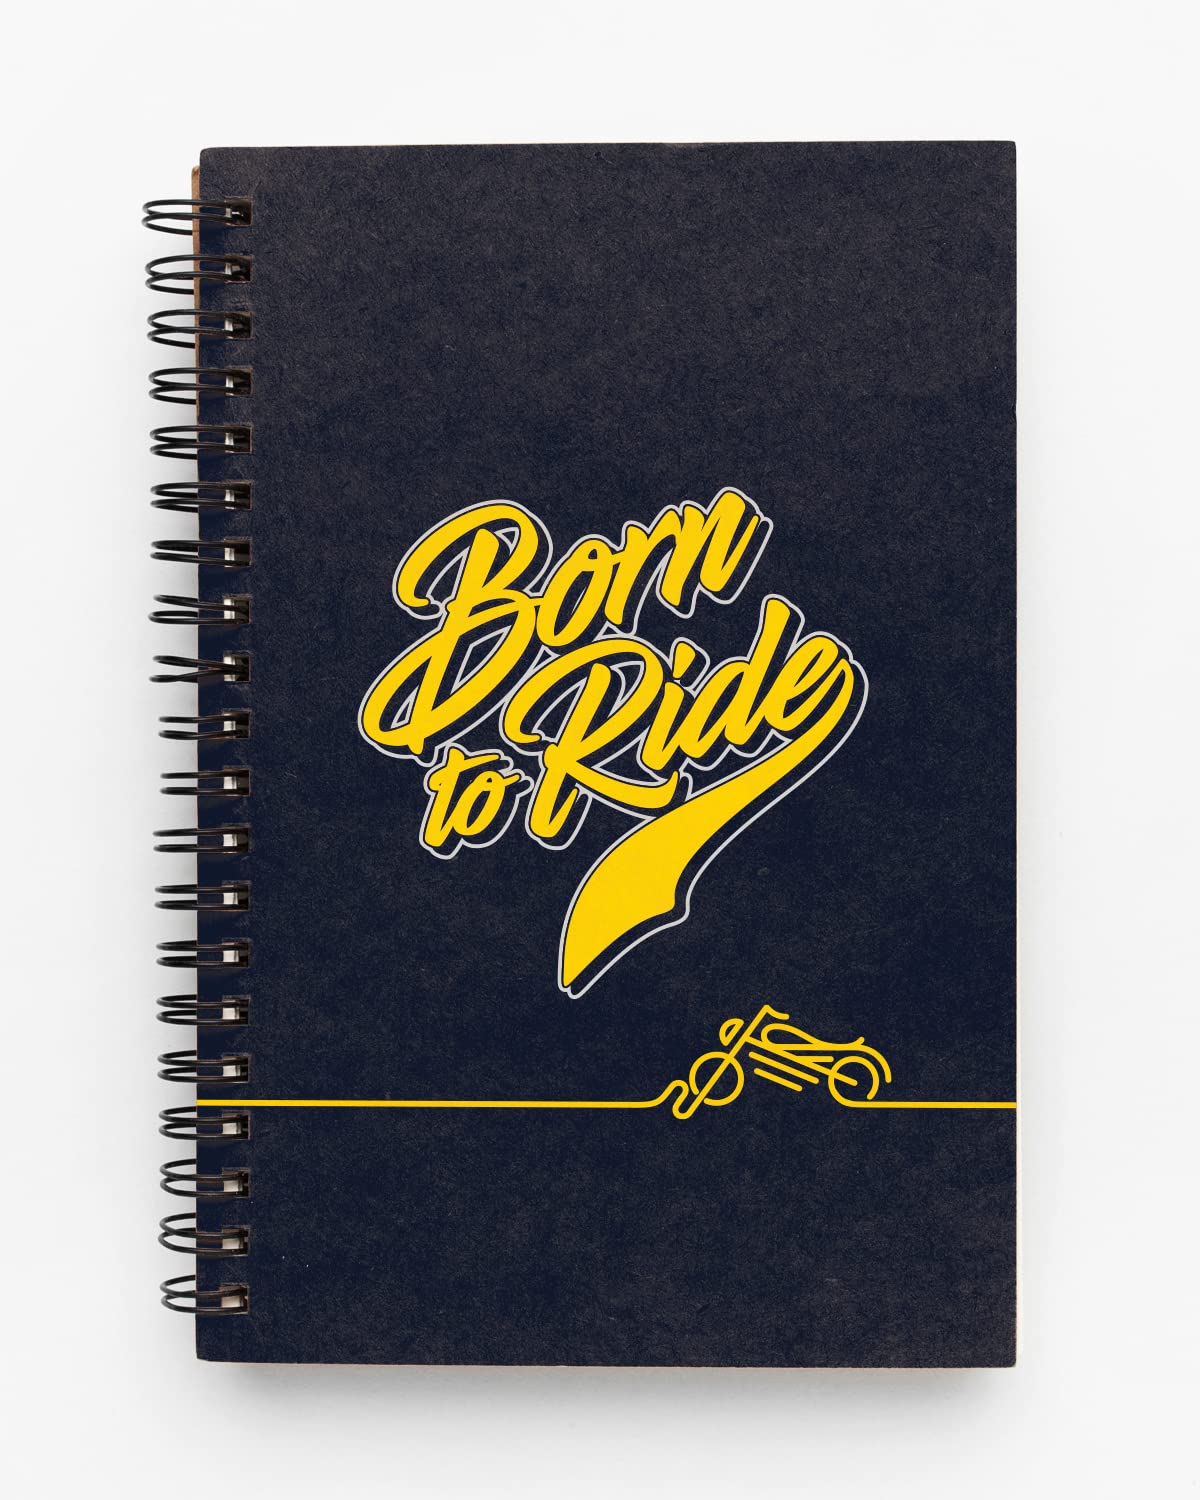 Born To Ride Spiral Notebook